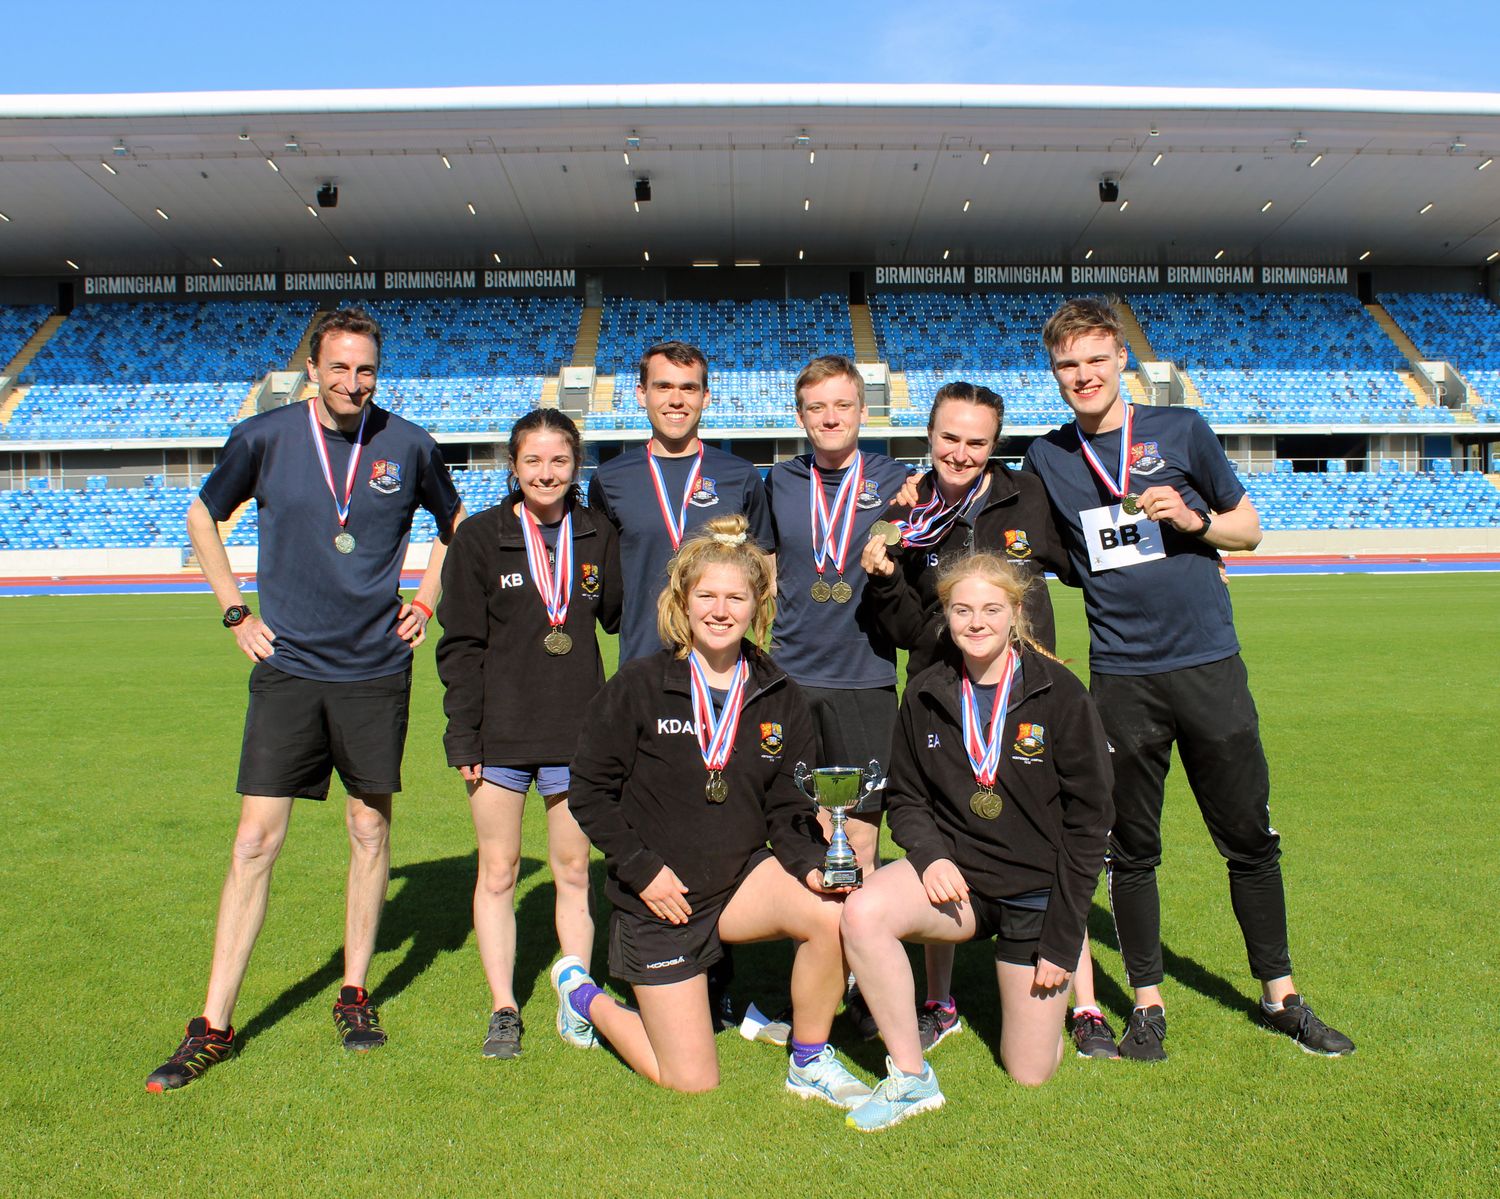 The BUOTC team pose smiling with their winning trophy and medals in front of the new Alexander Stadium stand, at the Midlands Army Athletics Championships.